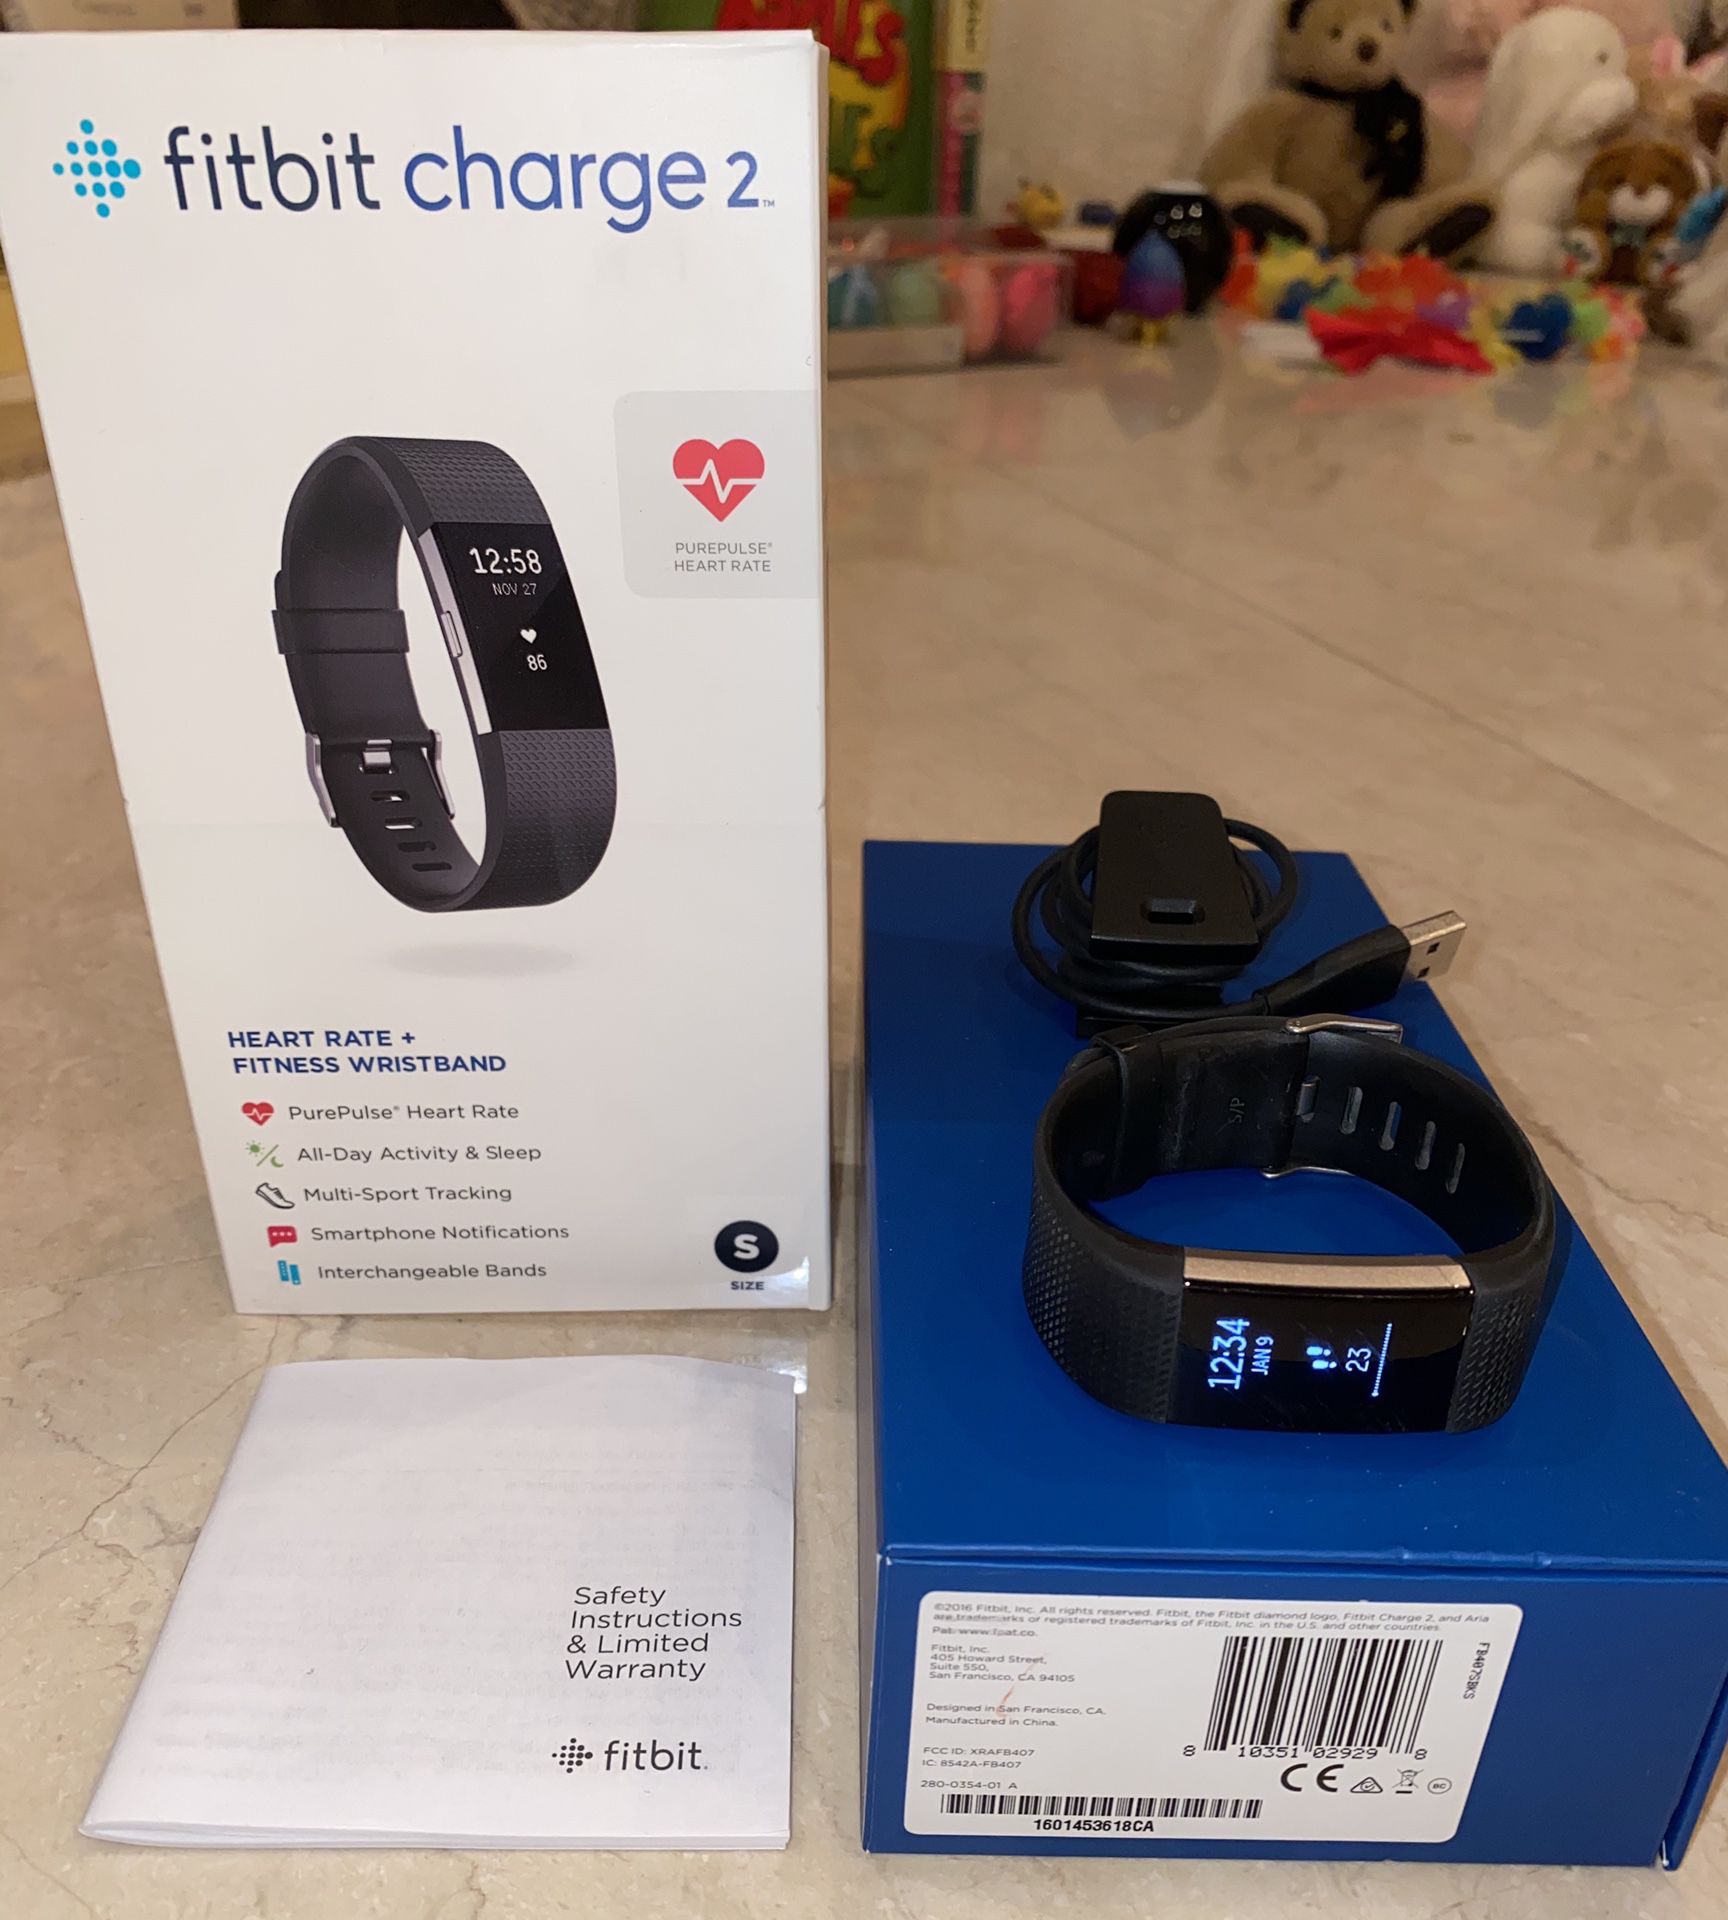 Fitbit Charge 2 Activity Tracker + Heart Rate Monitor w/ Charger